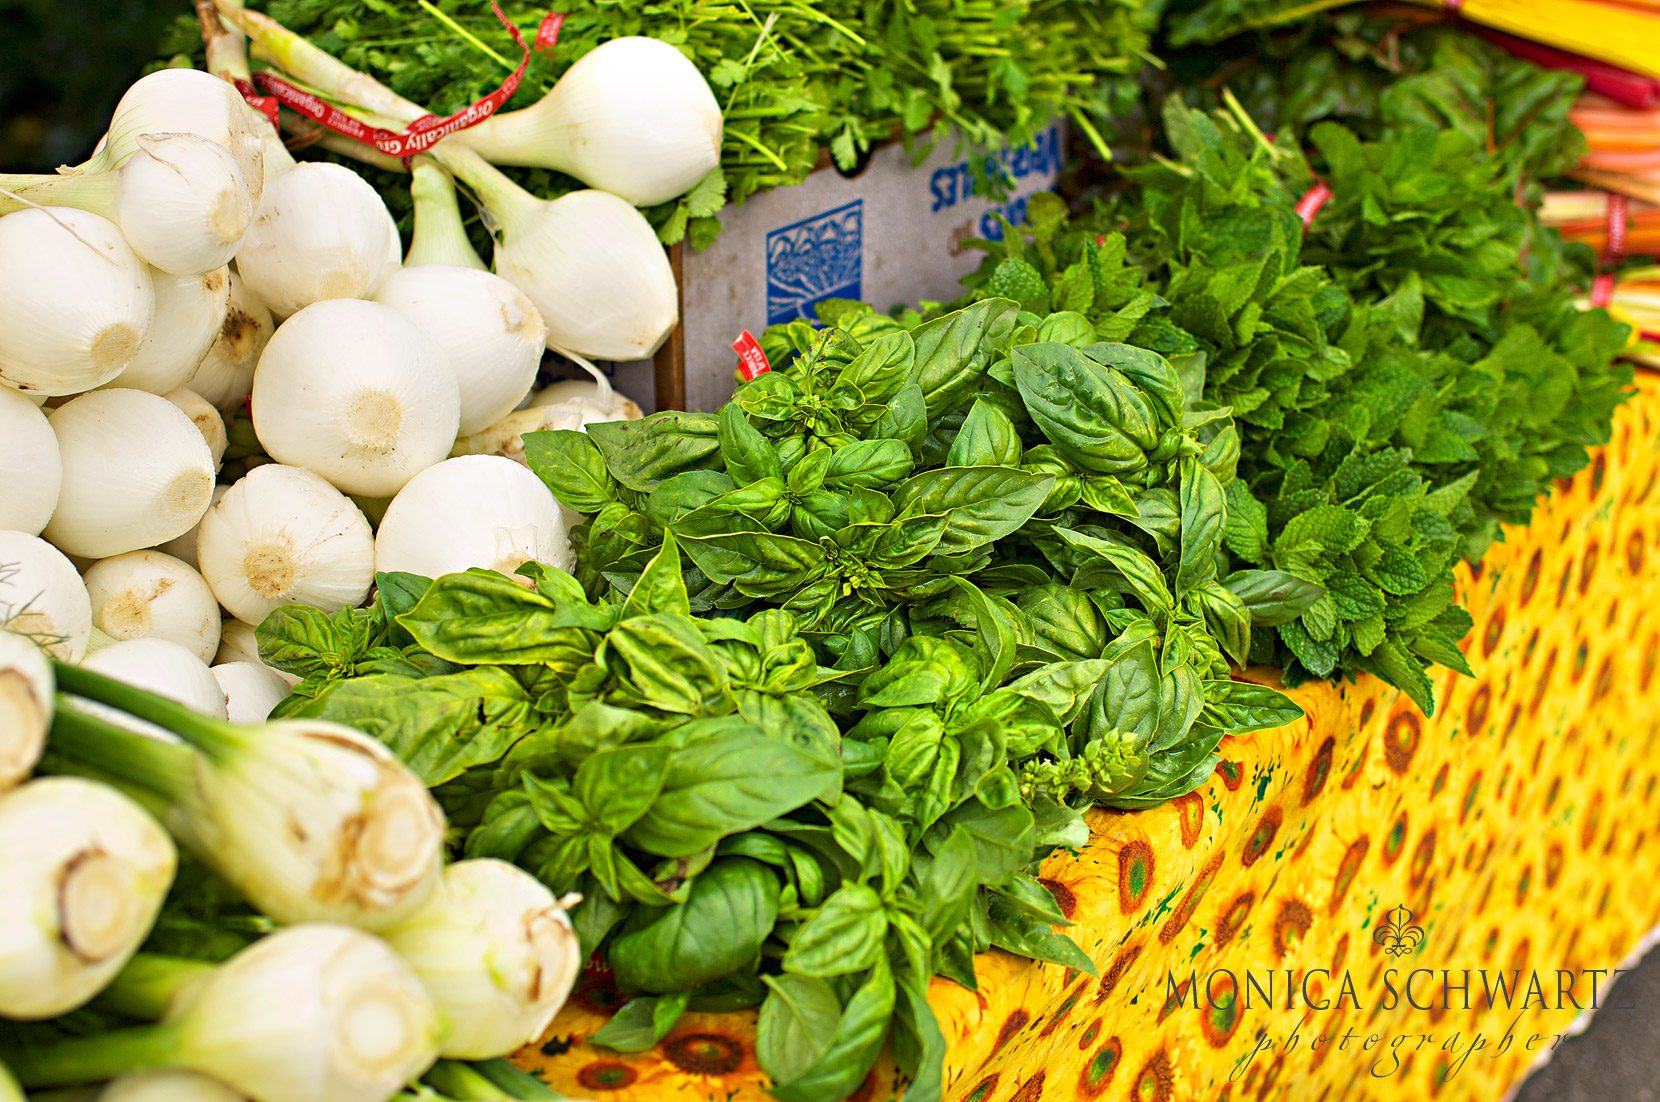 Organic-Basil-mint-parsley-onions-and-fennels-at-the-farmers-market-in-Carmel-by-the-Sea-California